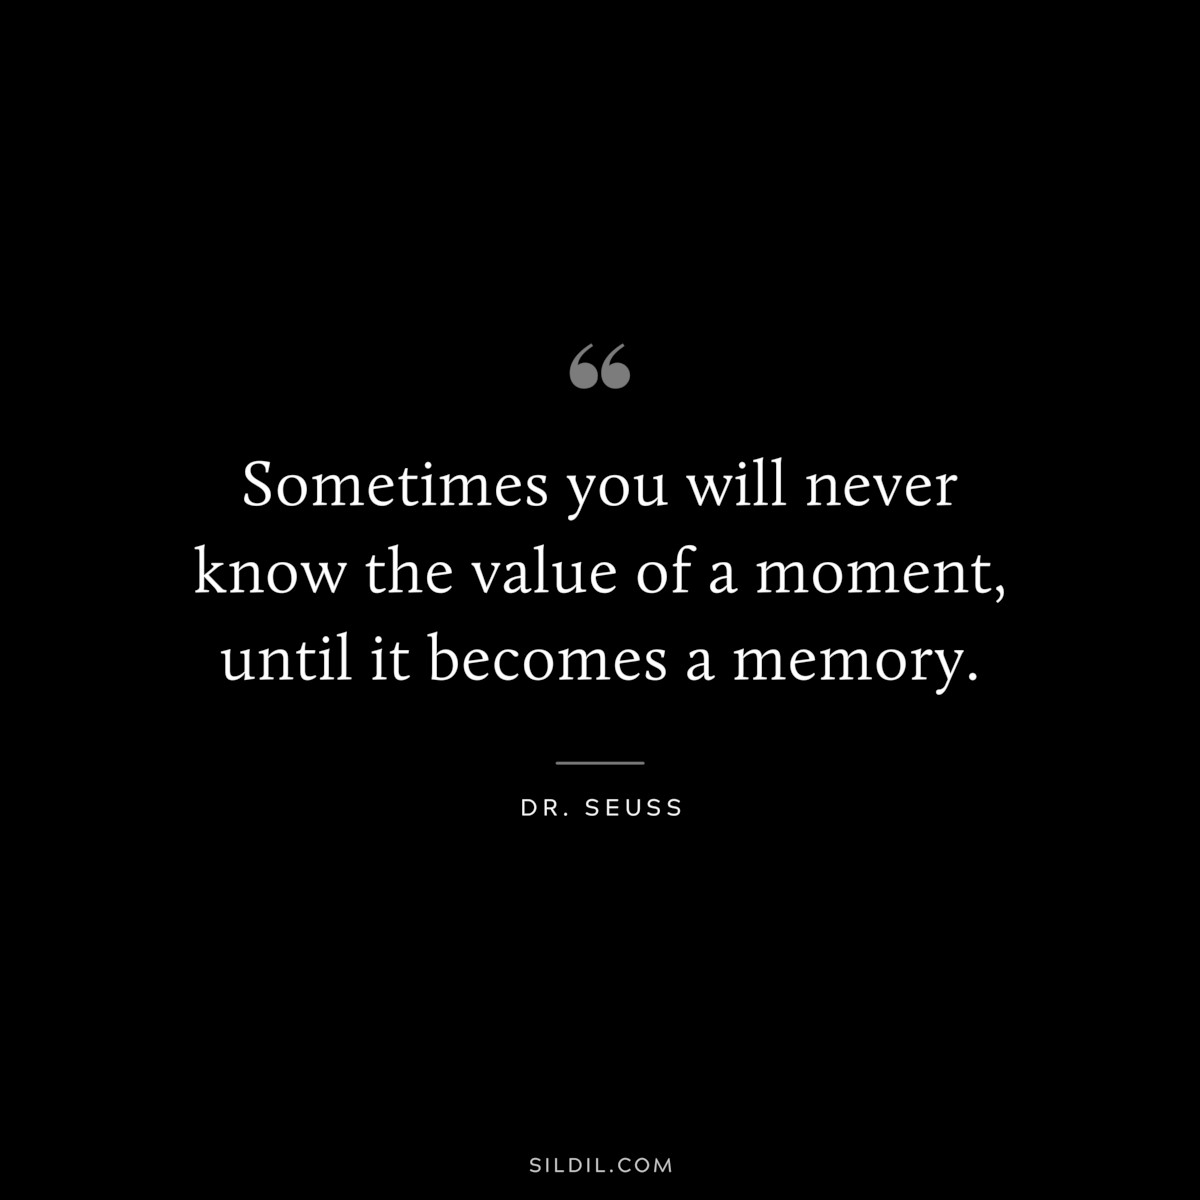 Sometimes you will never know the value of a moment, until it becomes a memory. ― Dr. Seuss